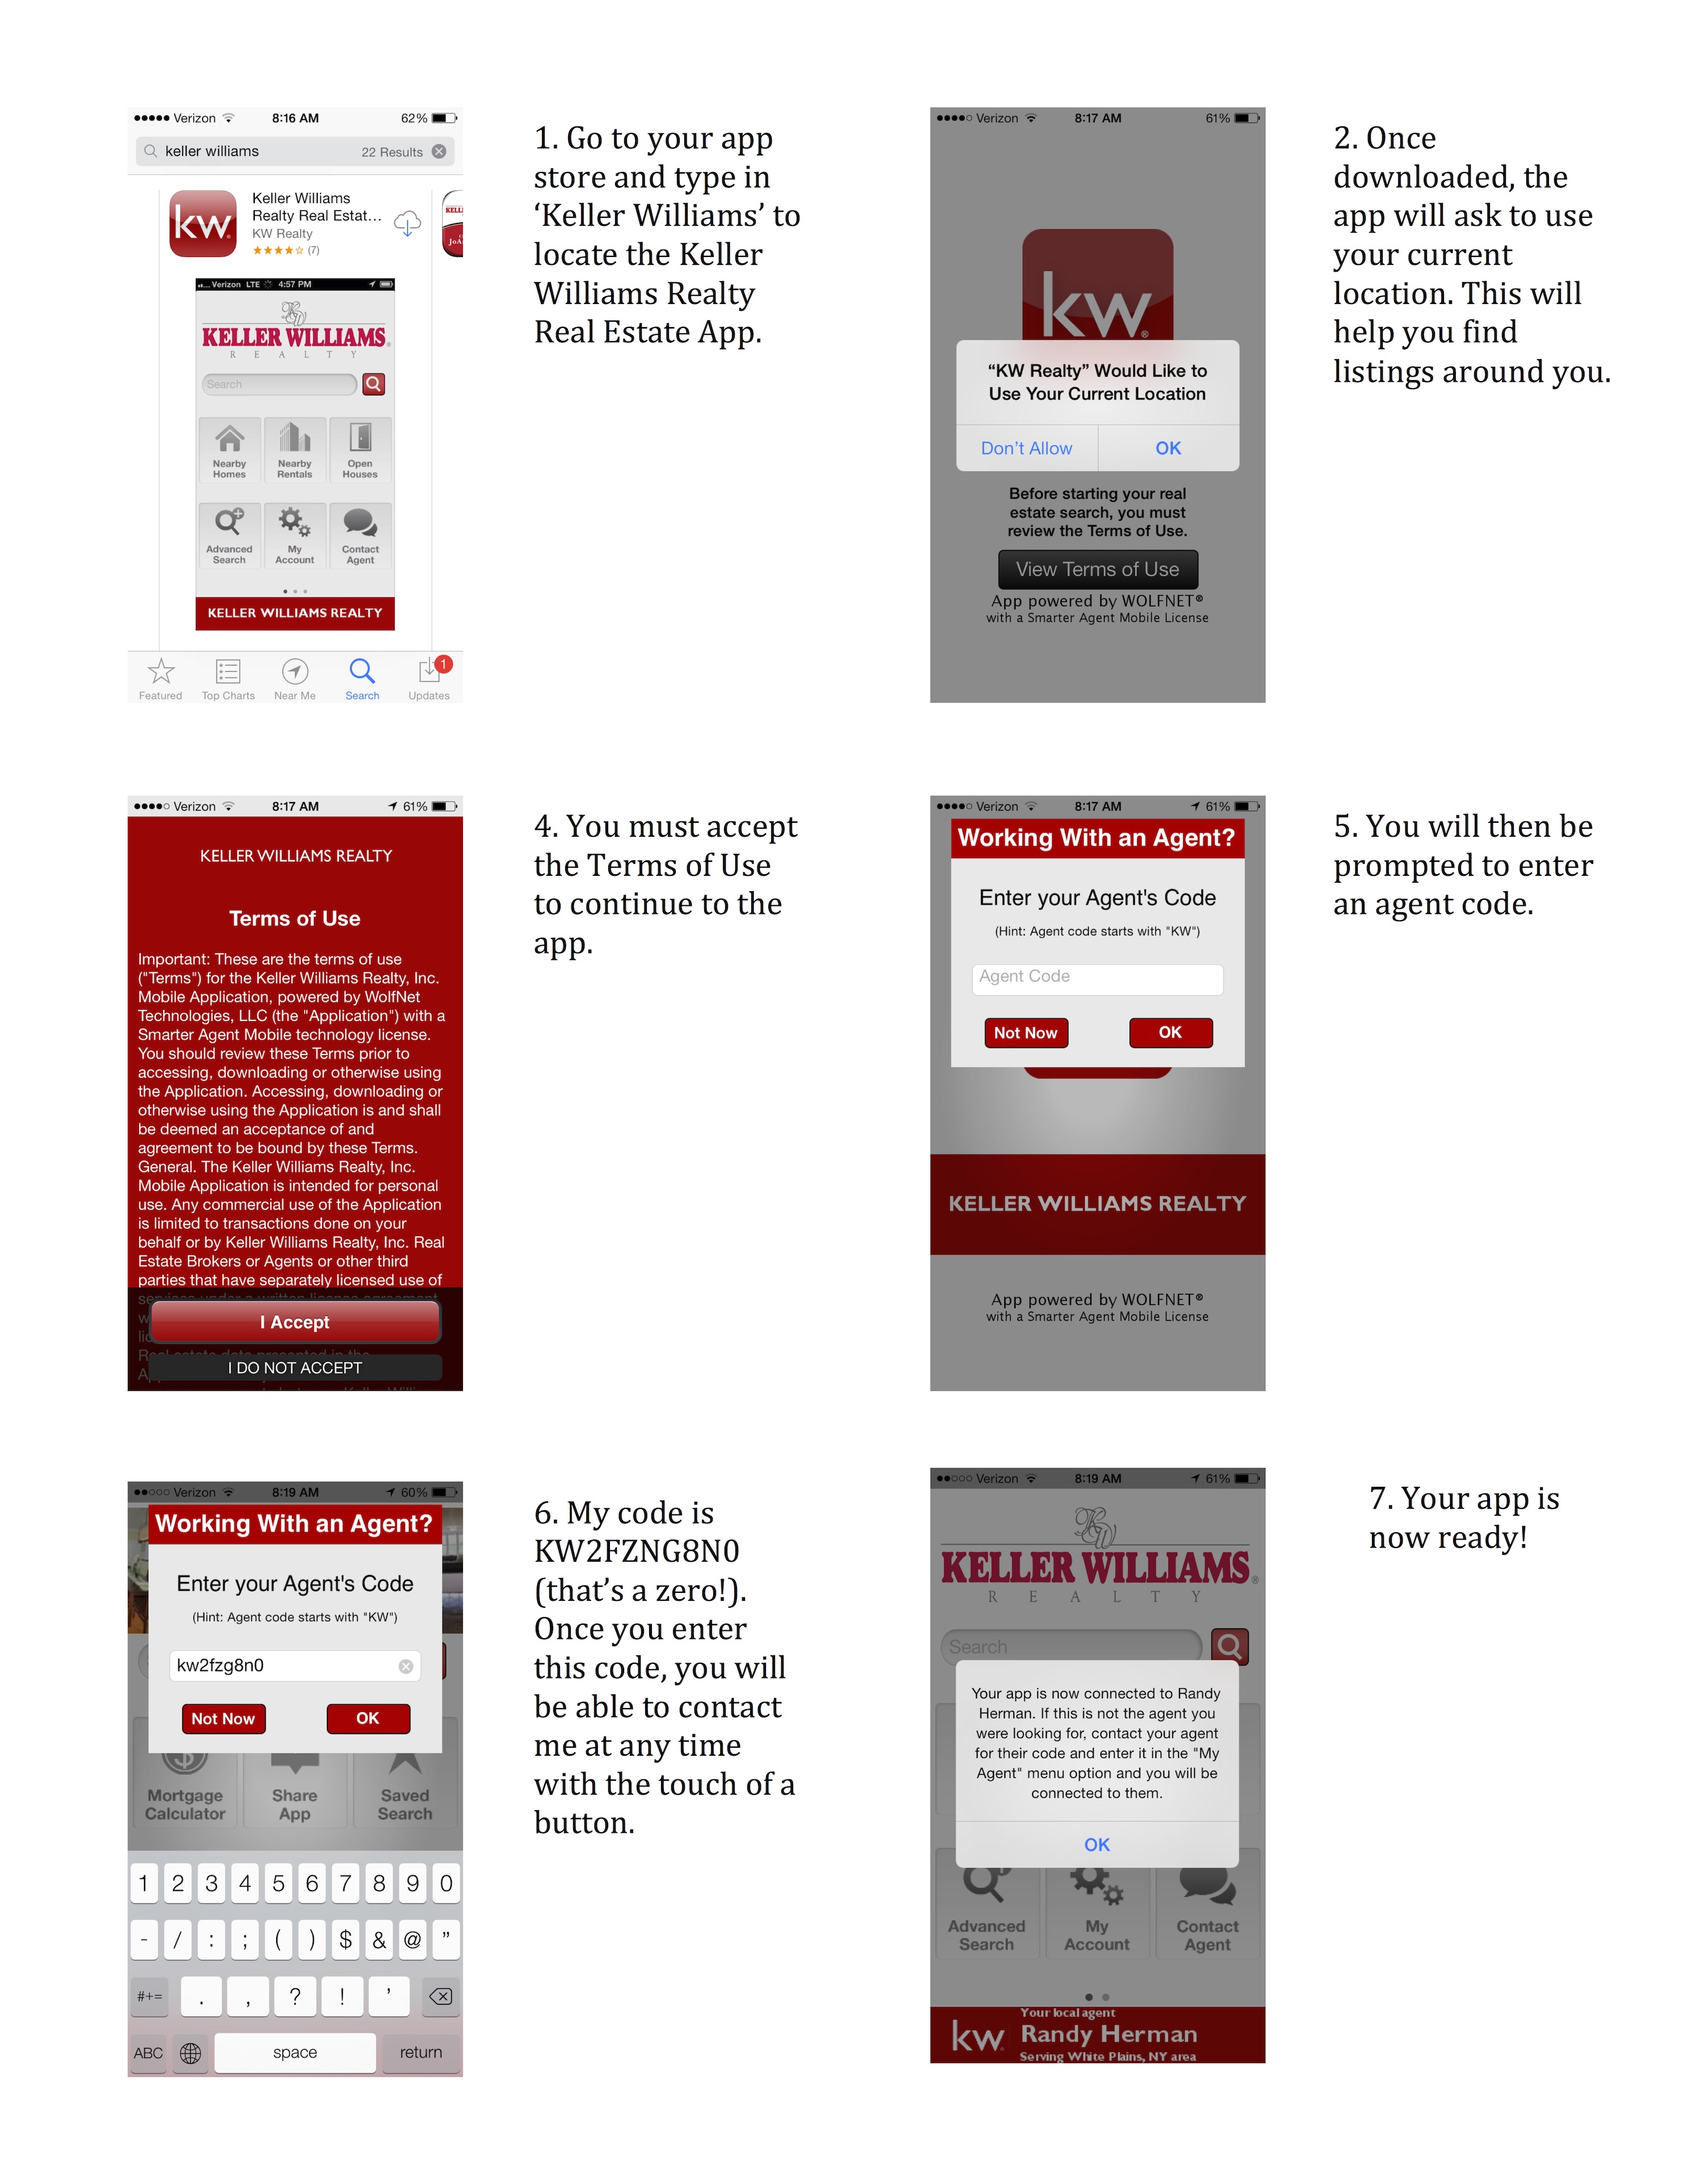 How To Download Keller Williams Realty App to Search For Properties Randy Herman